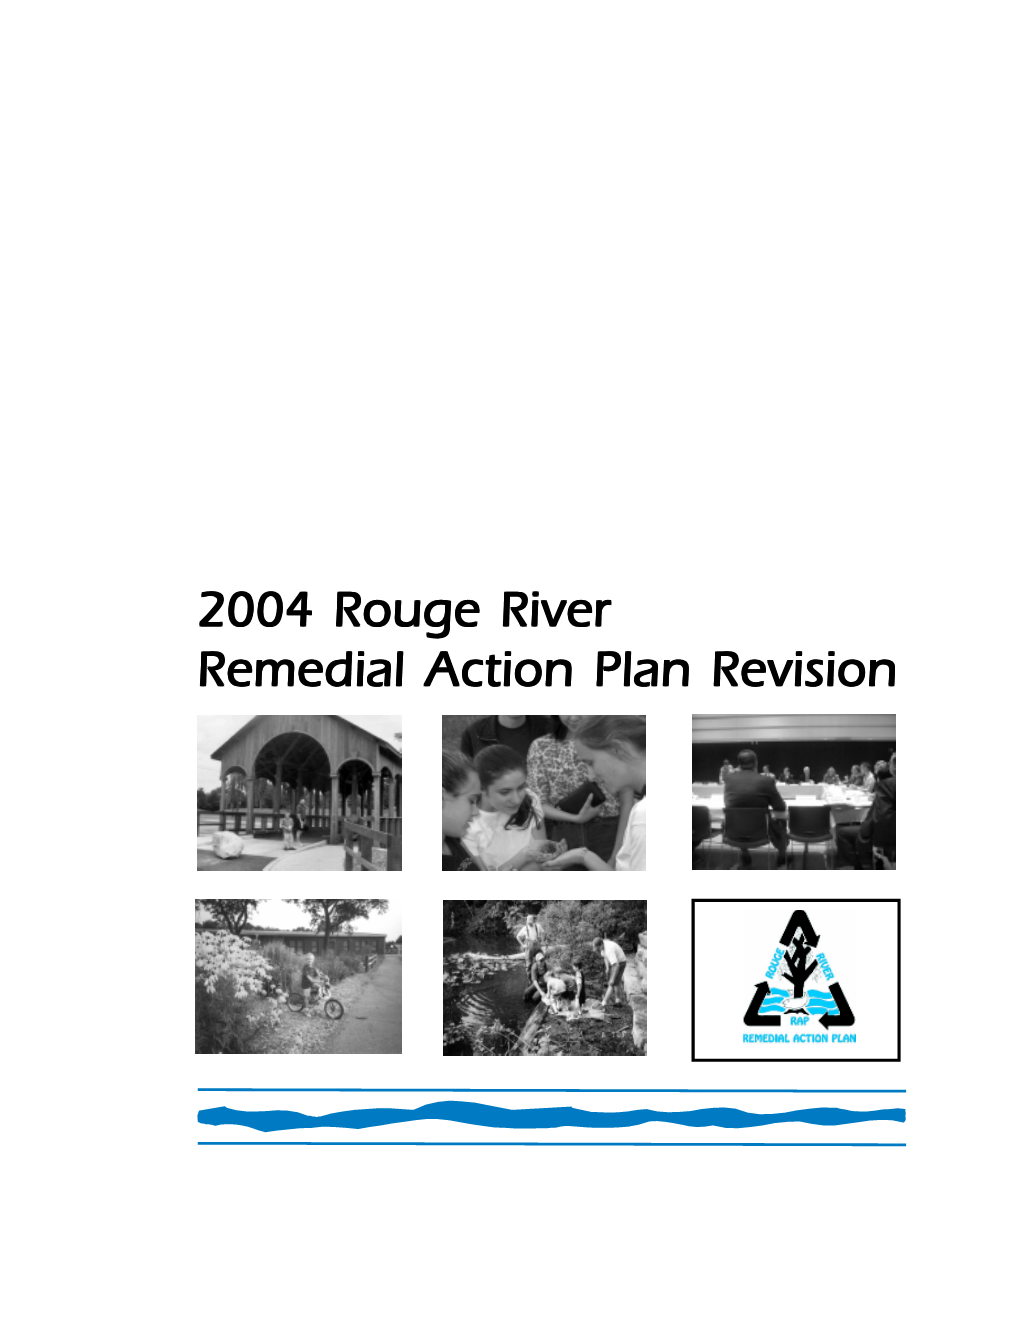 Rouge River Remedial Action Plan Revision Thank You!